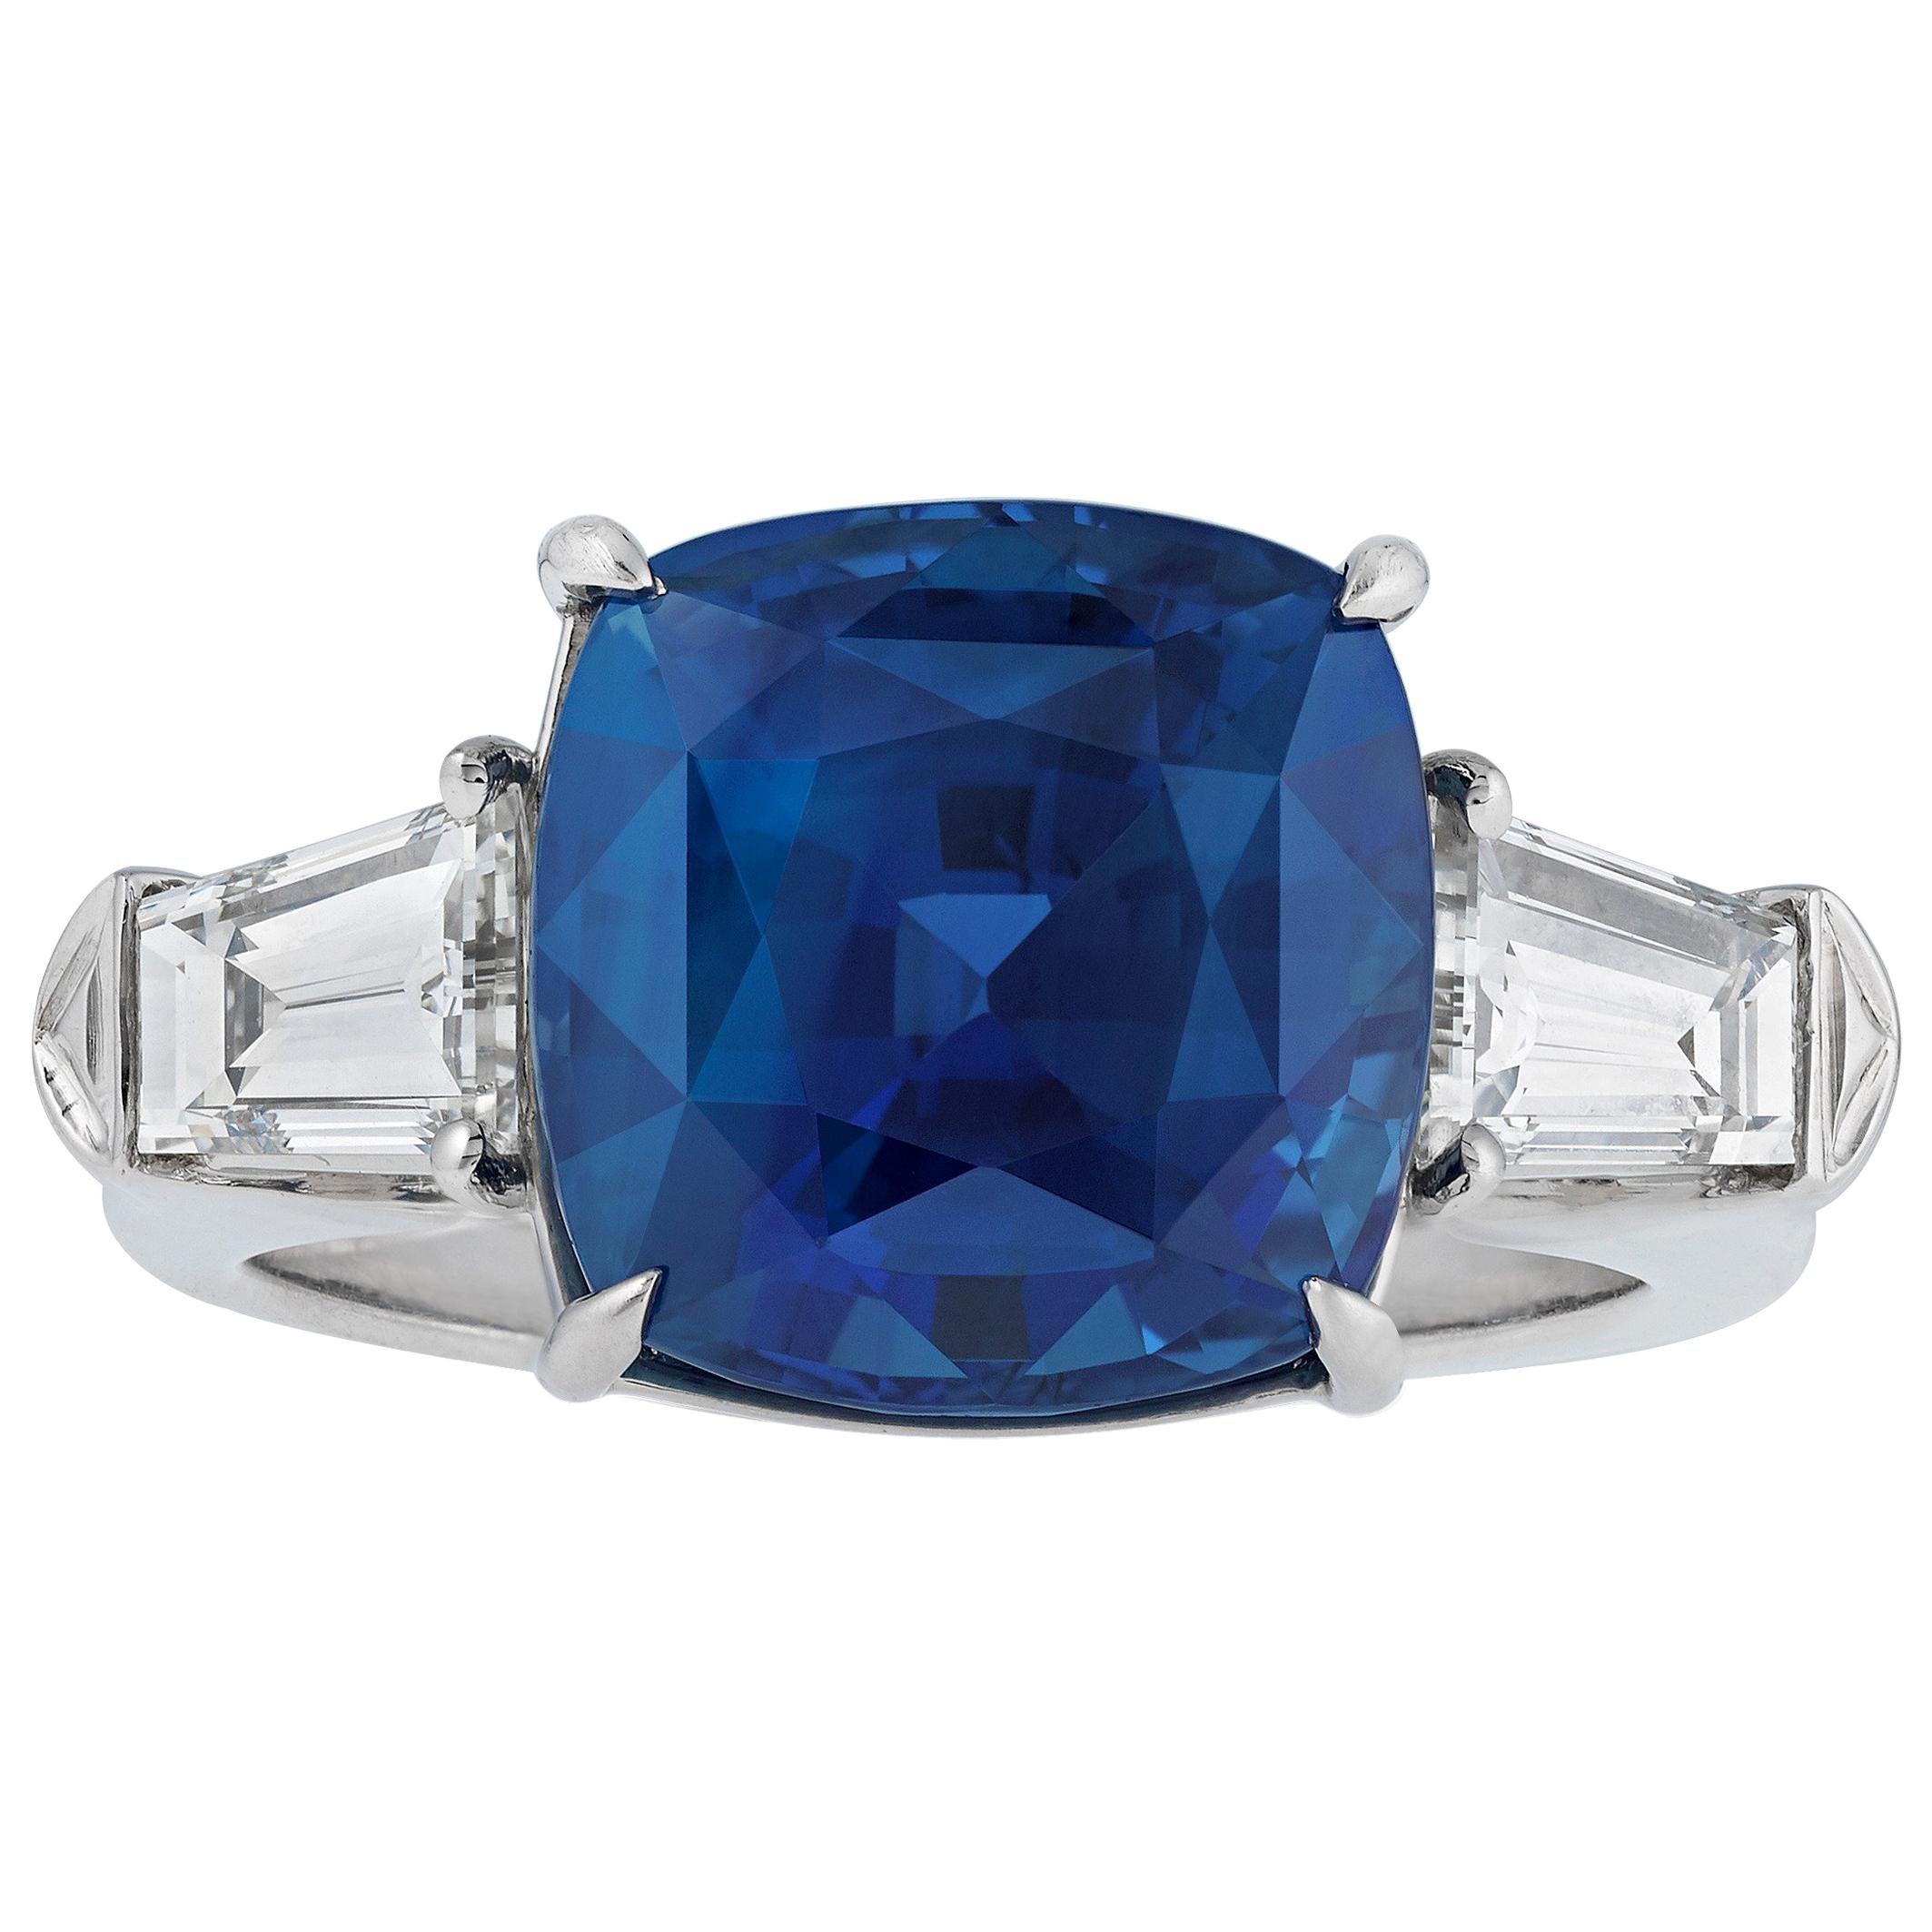 8.20 Carat Natural Sapphire and Diamond Ring